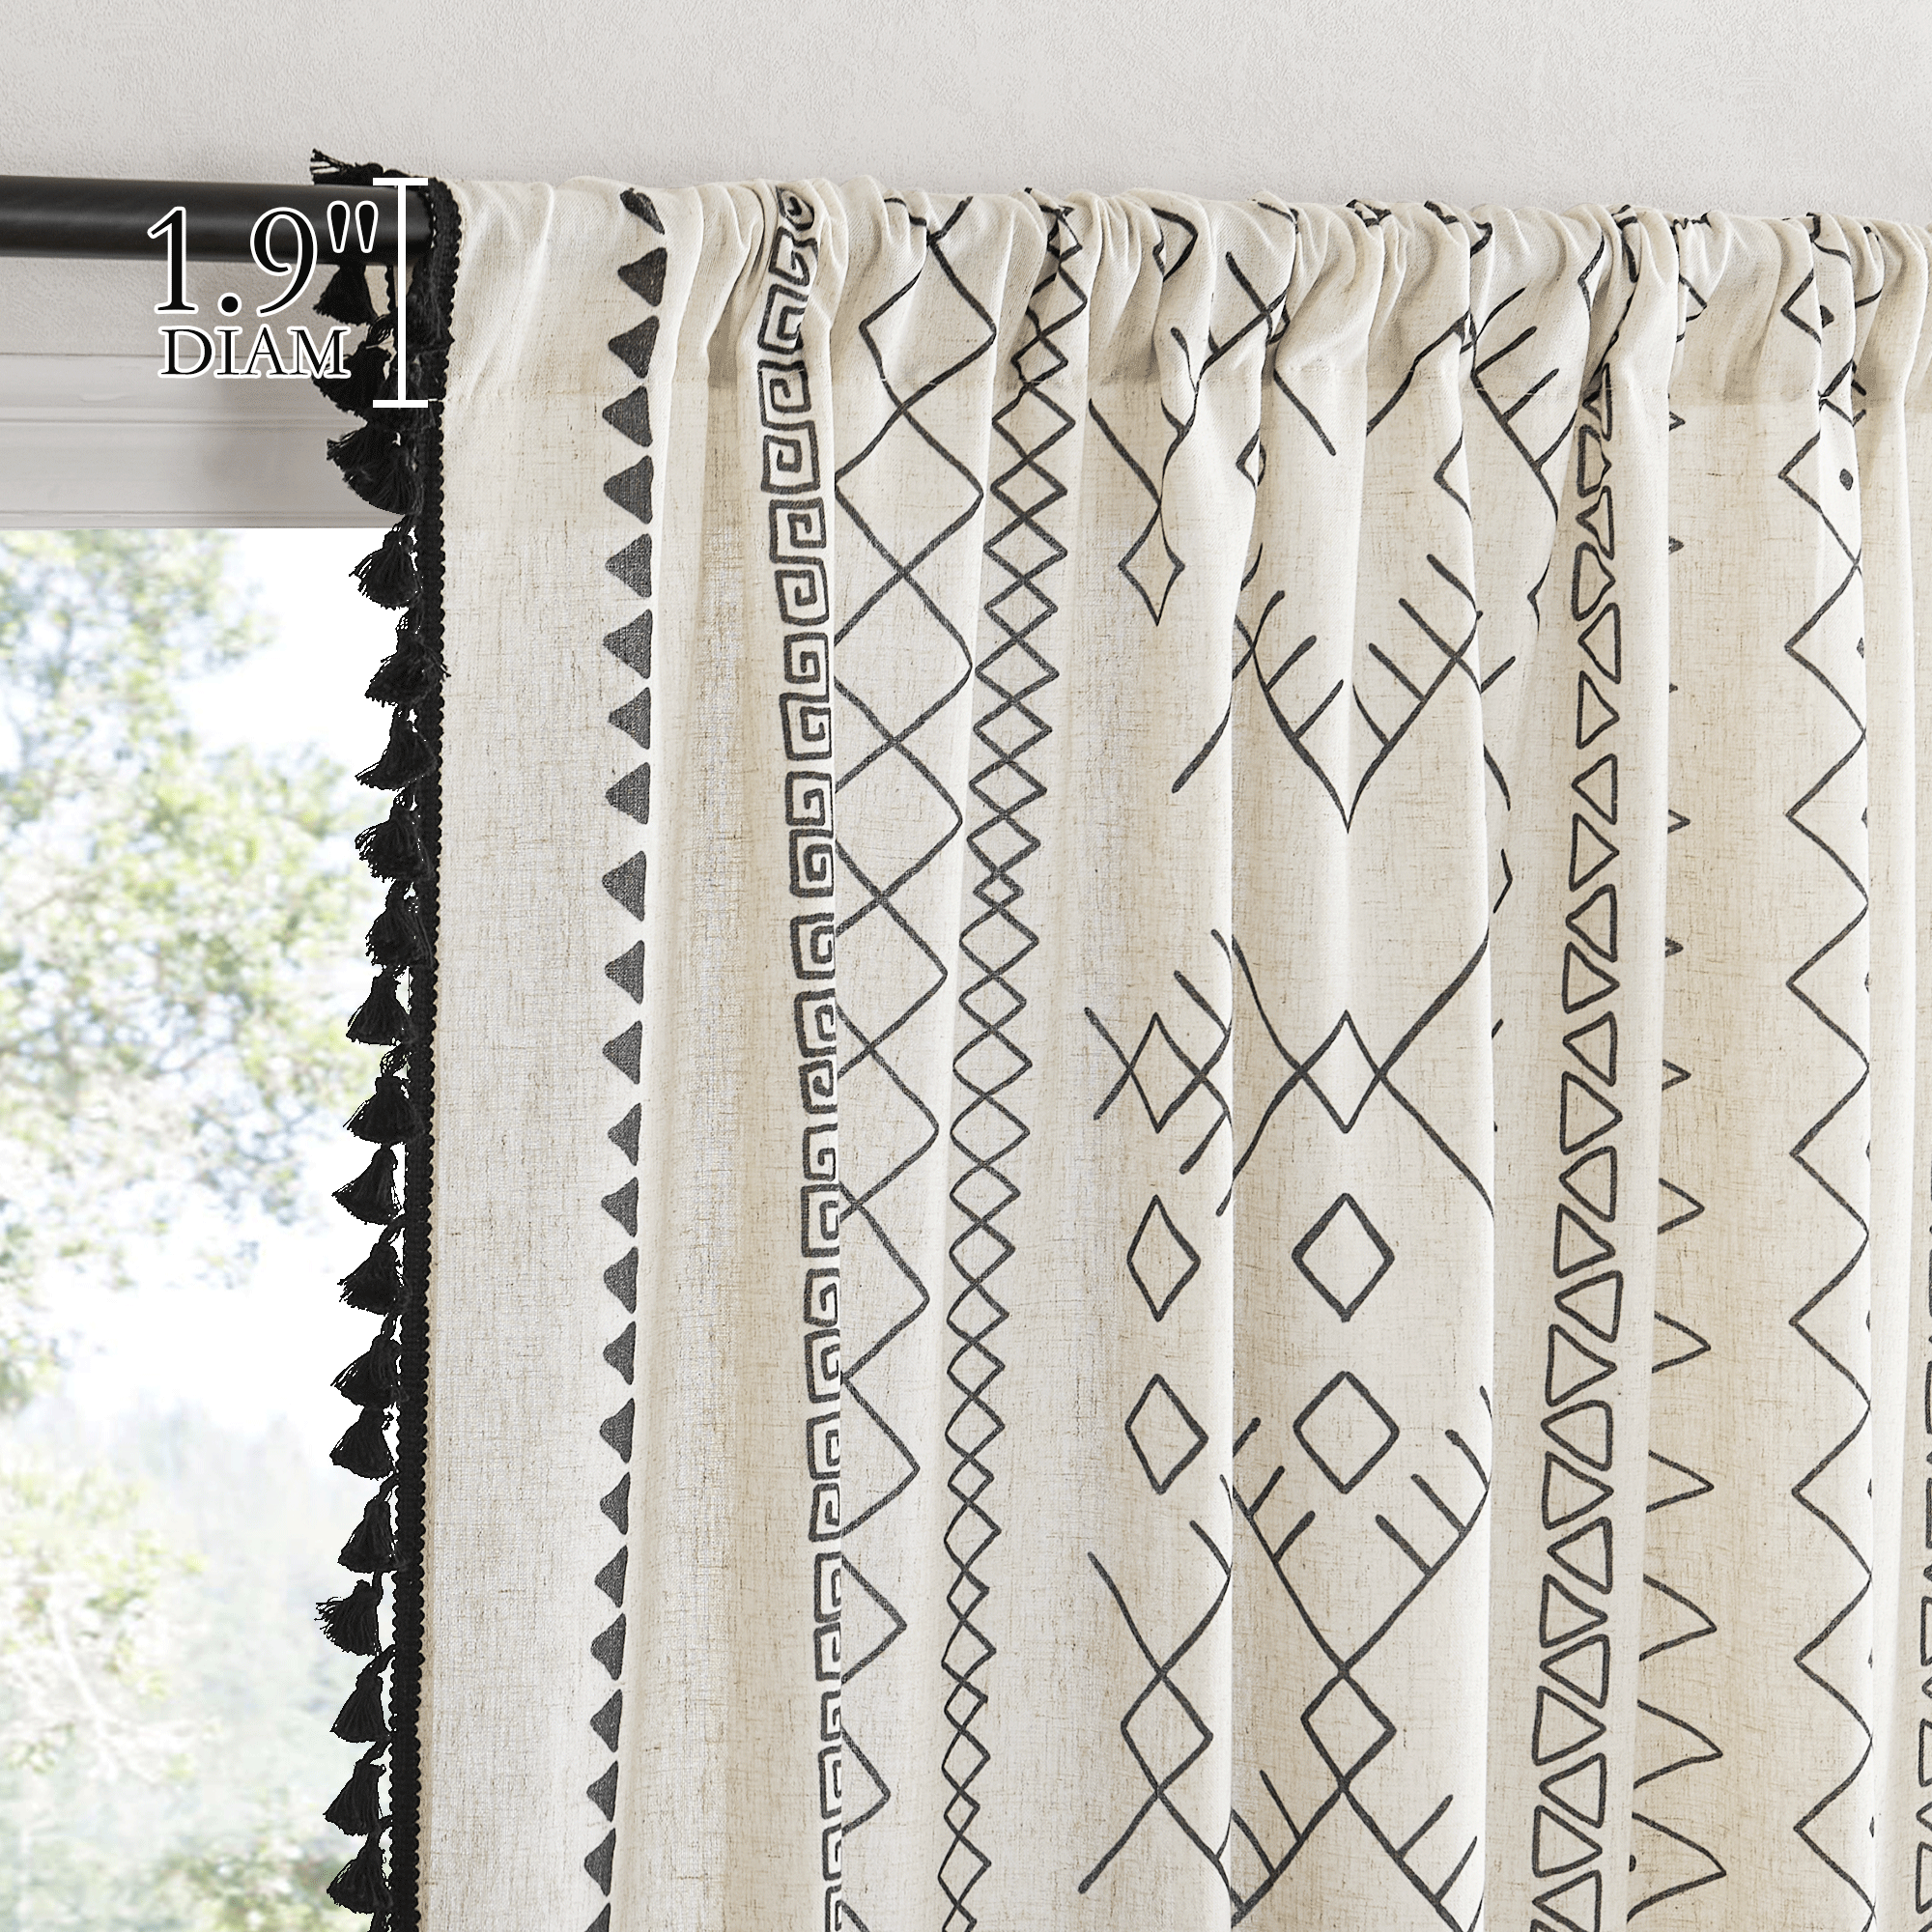 Rod Pocket Pattern Tassel Curtains Sheer Privacy Linen Curtains For Bedroom 2 Panels KGORGE Store